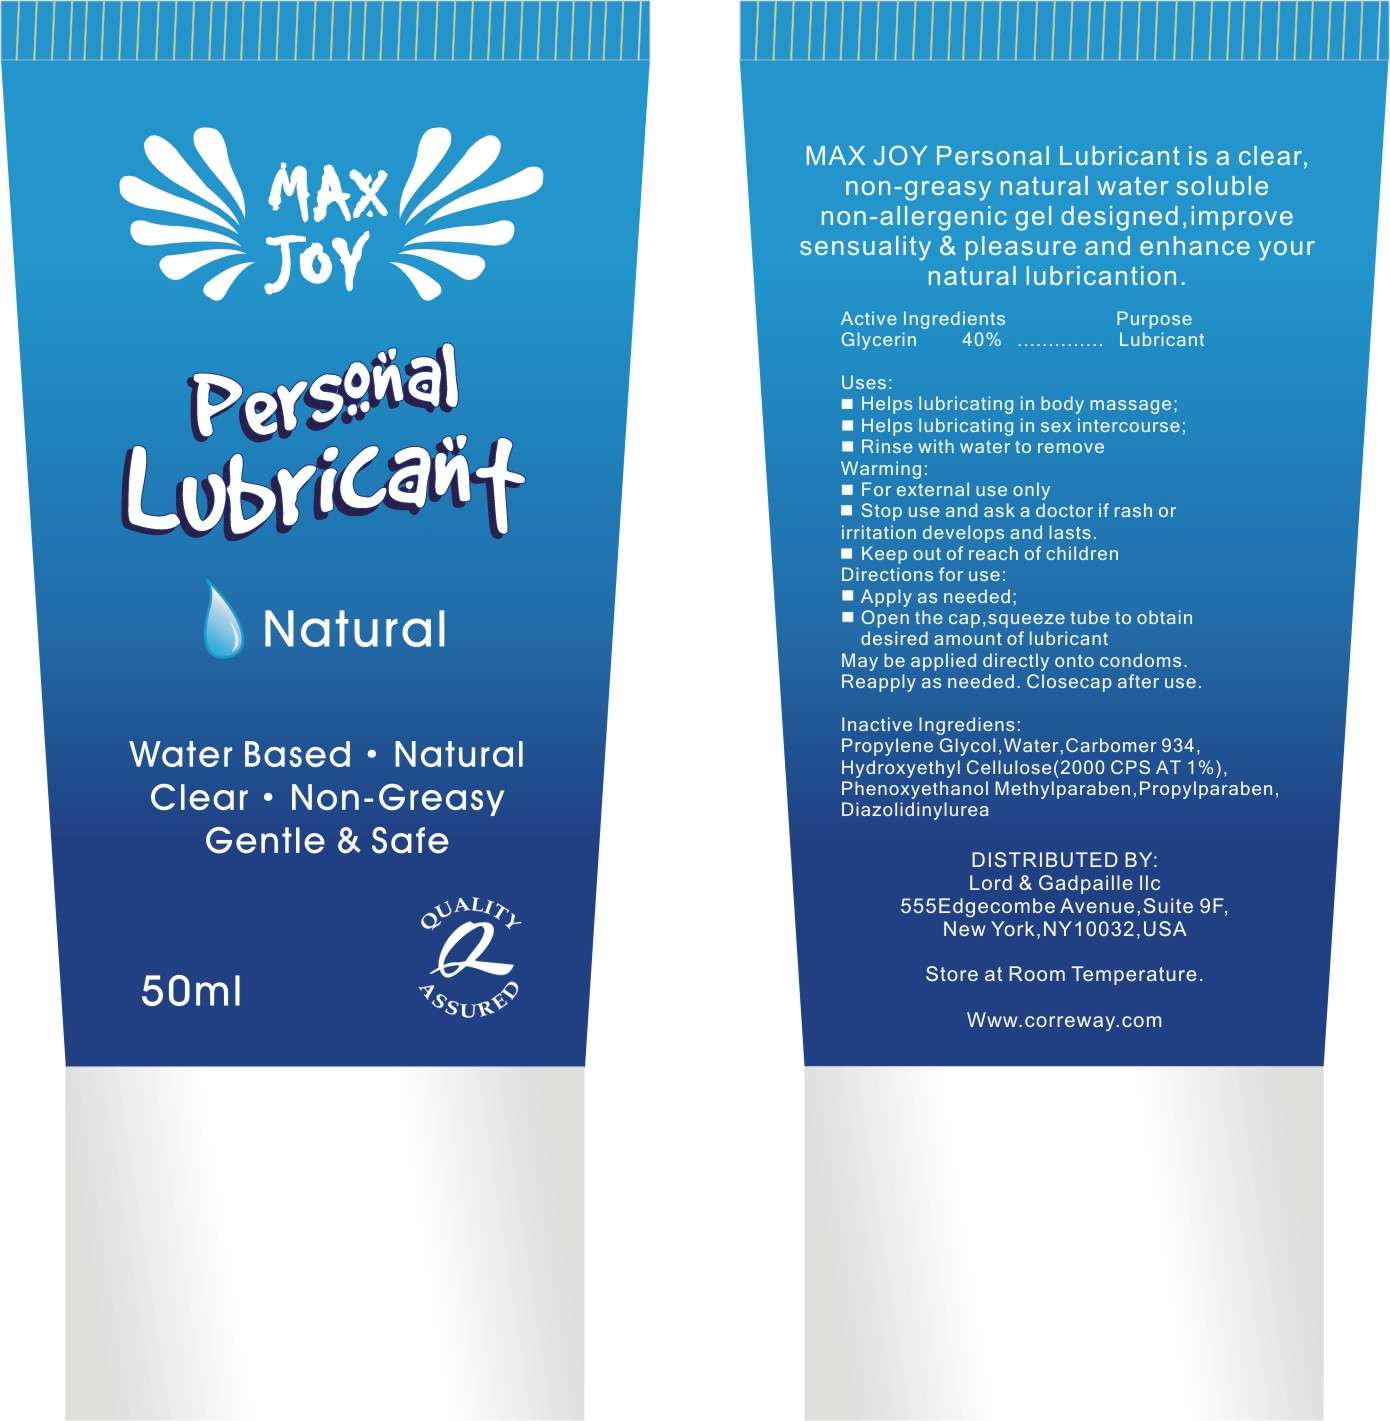 Correway Personal Lubricant